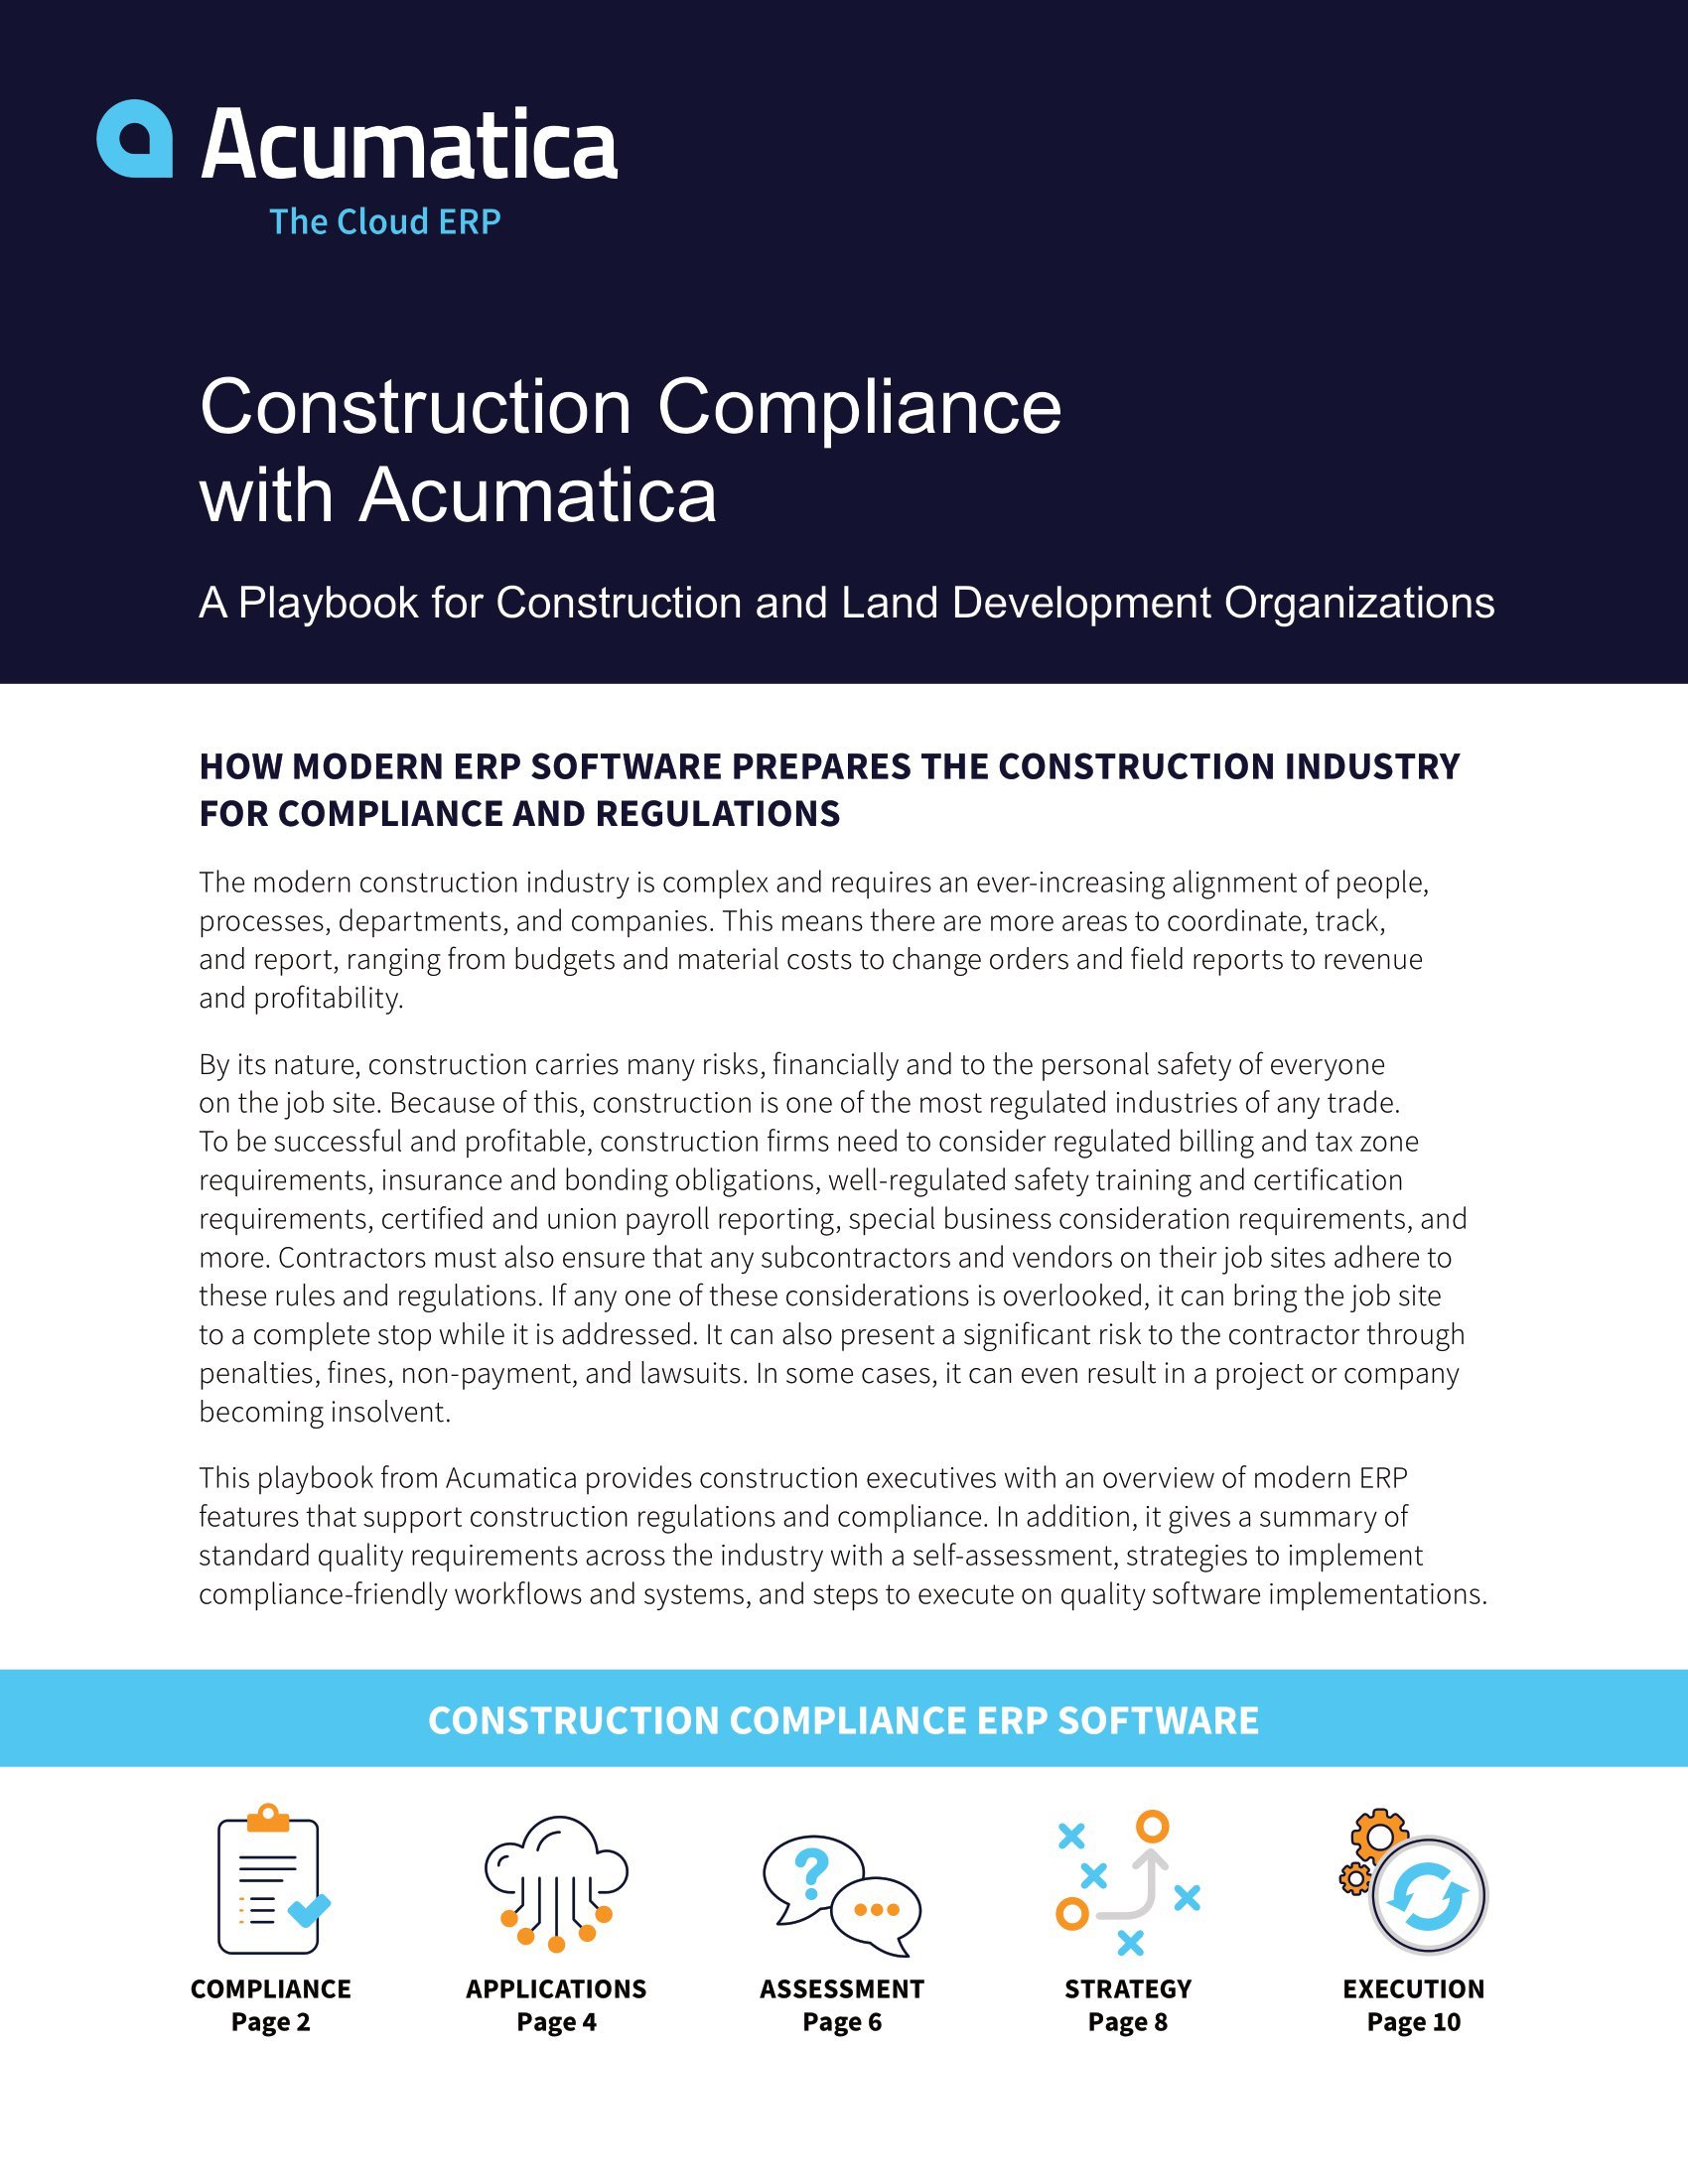 So Many Construction Regulations, So Easily Handled with the Right Construction Compliance Software, page 0